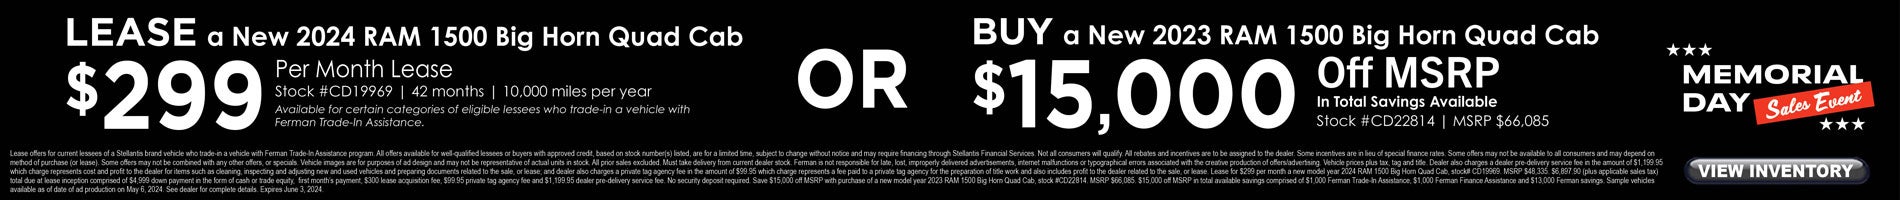 Amazing May Deals on New RAM 1500 Big Horn